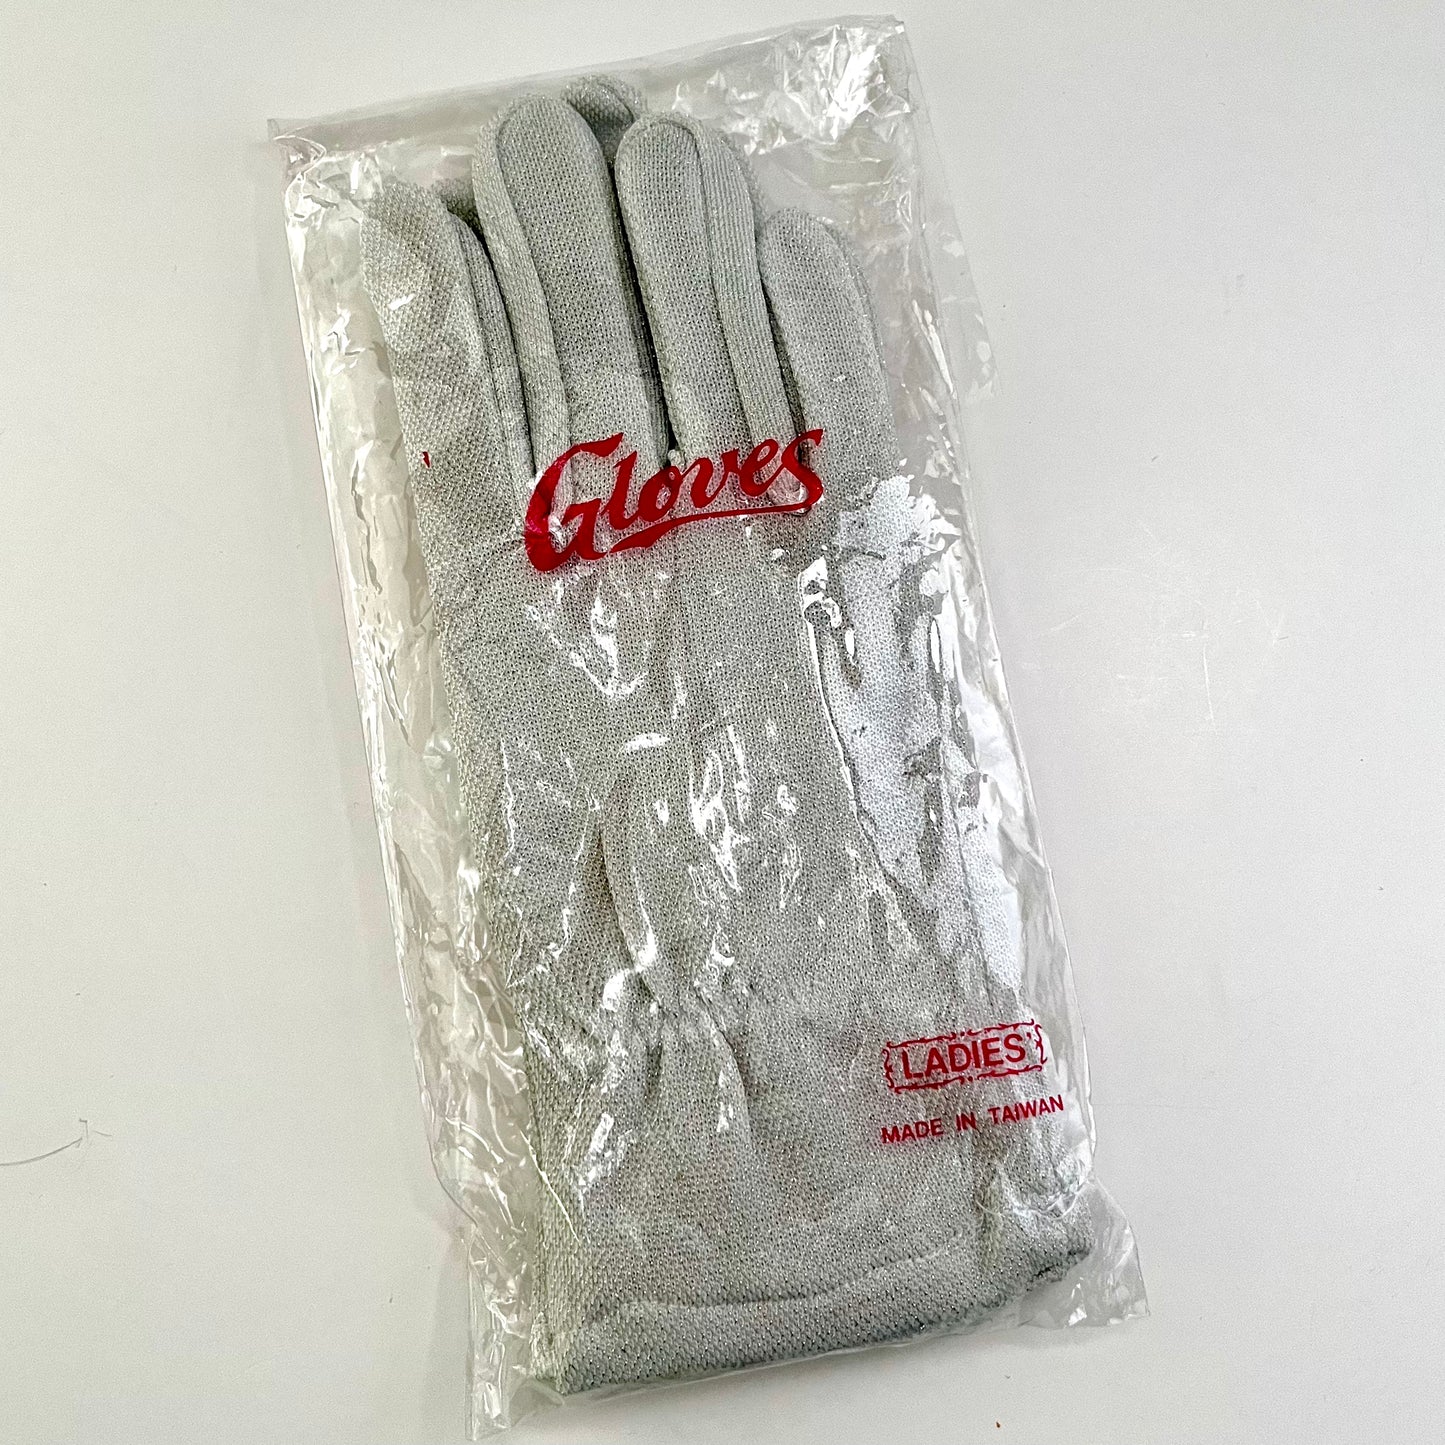 Late 70s/ Early 80s Metallic Silver Stretch Gloves